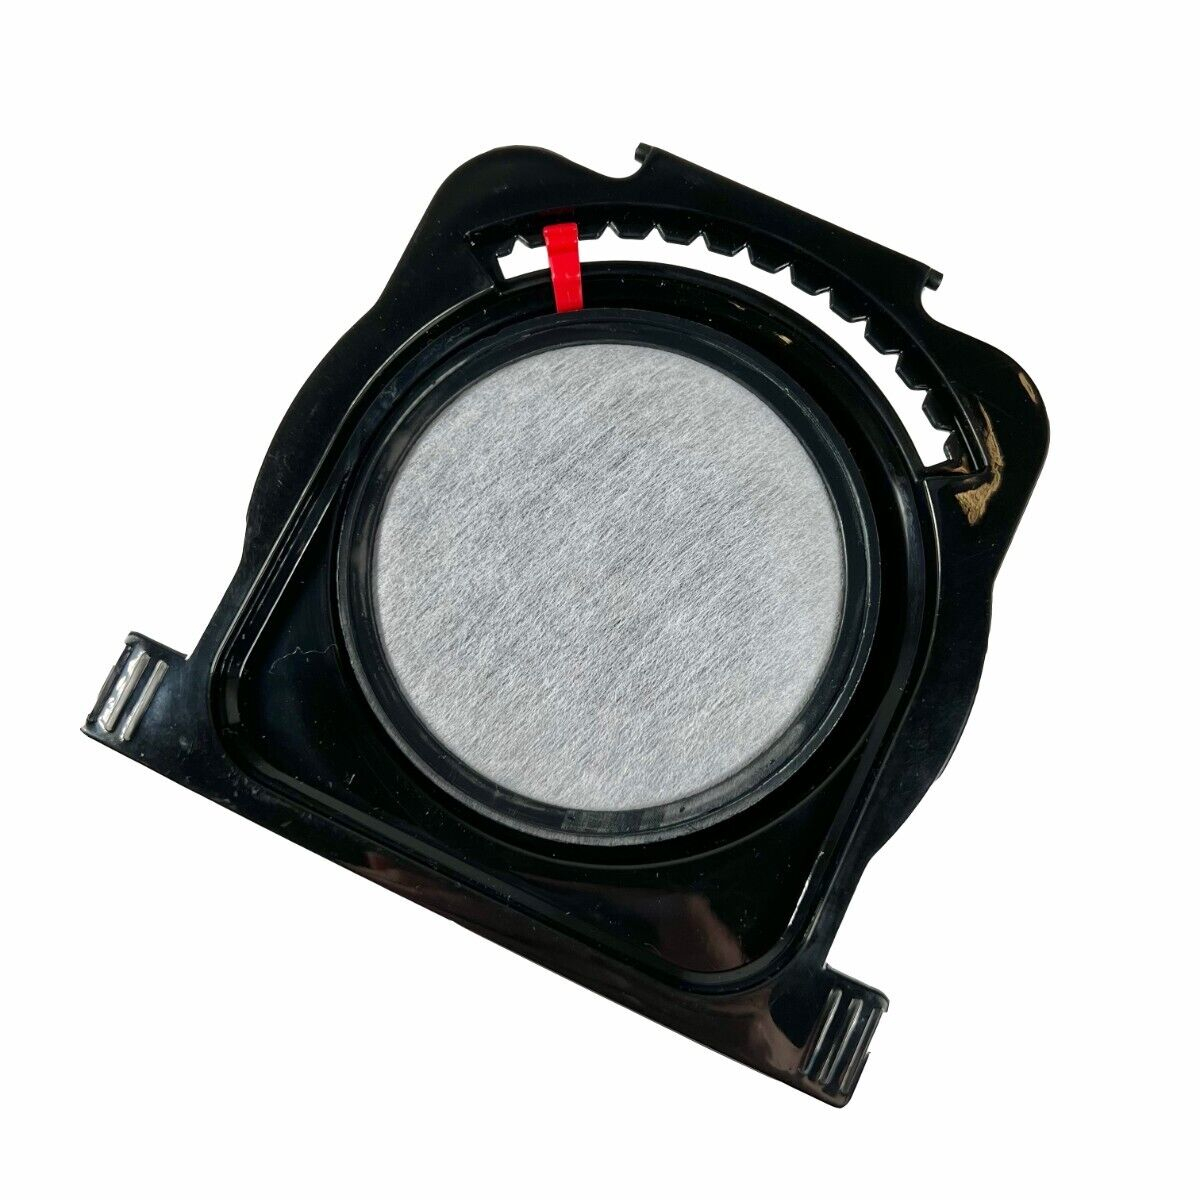 Mr. Coffee 140405-000-000 Filter Holder and Filter BVMC-PSTX Genuine OEM - image 1 of 2